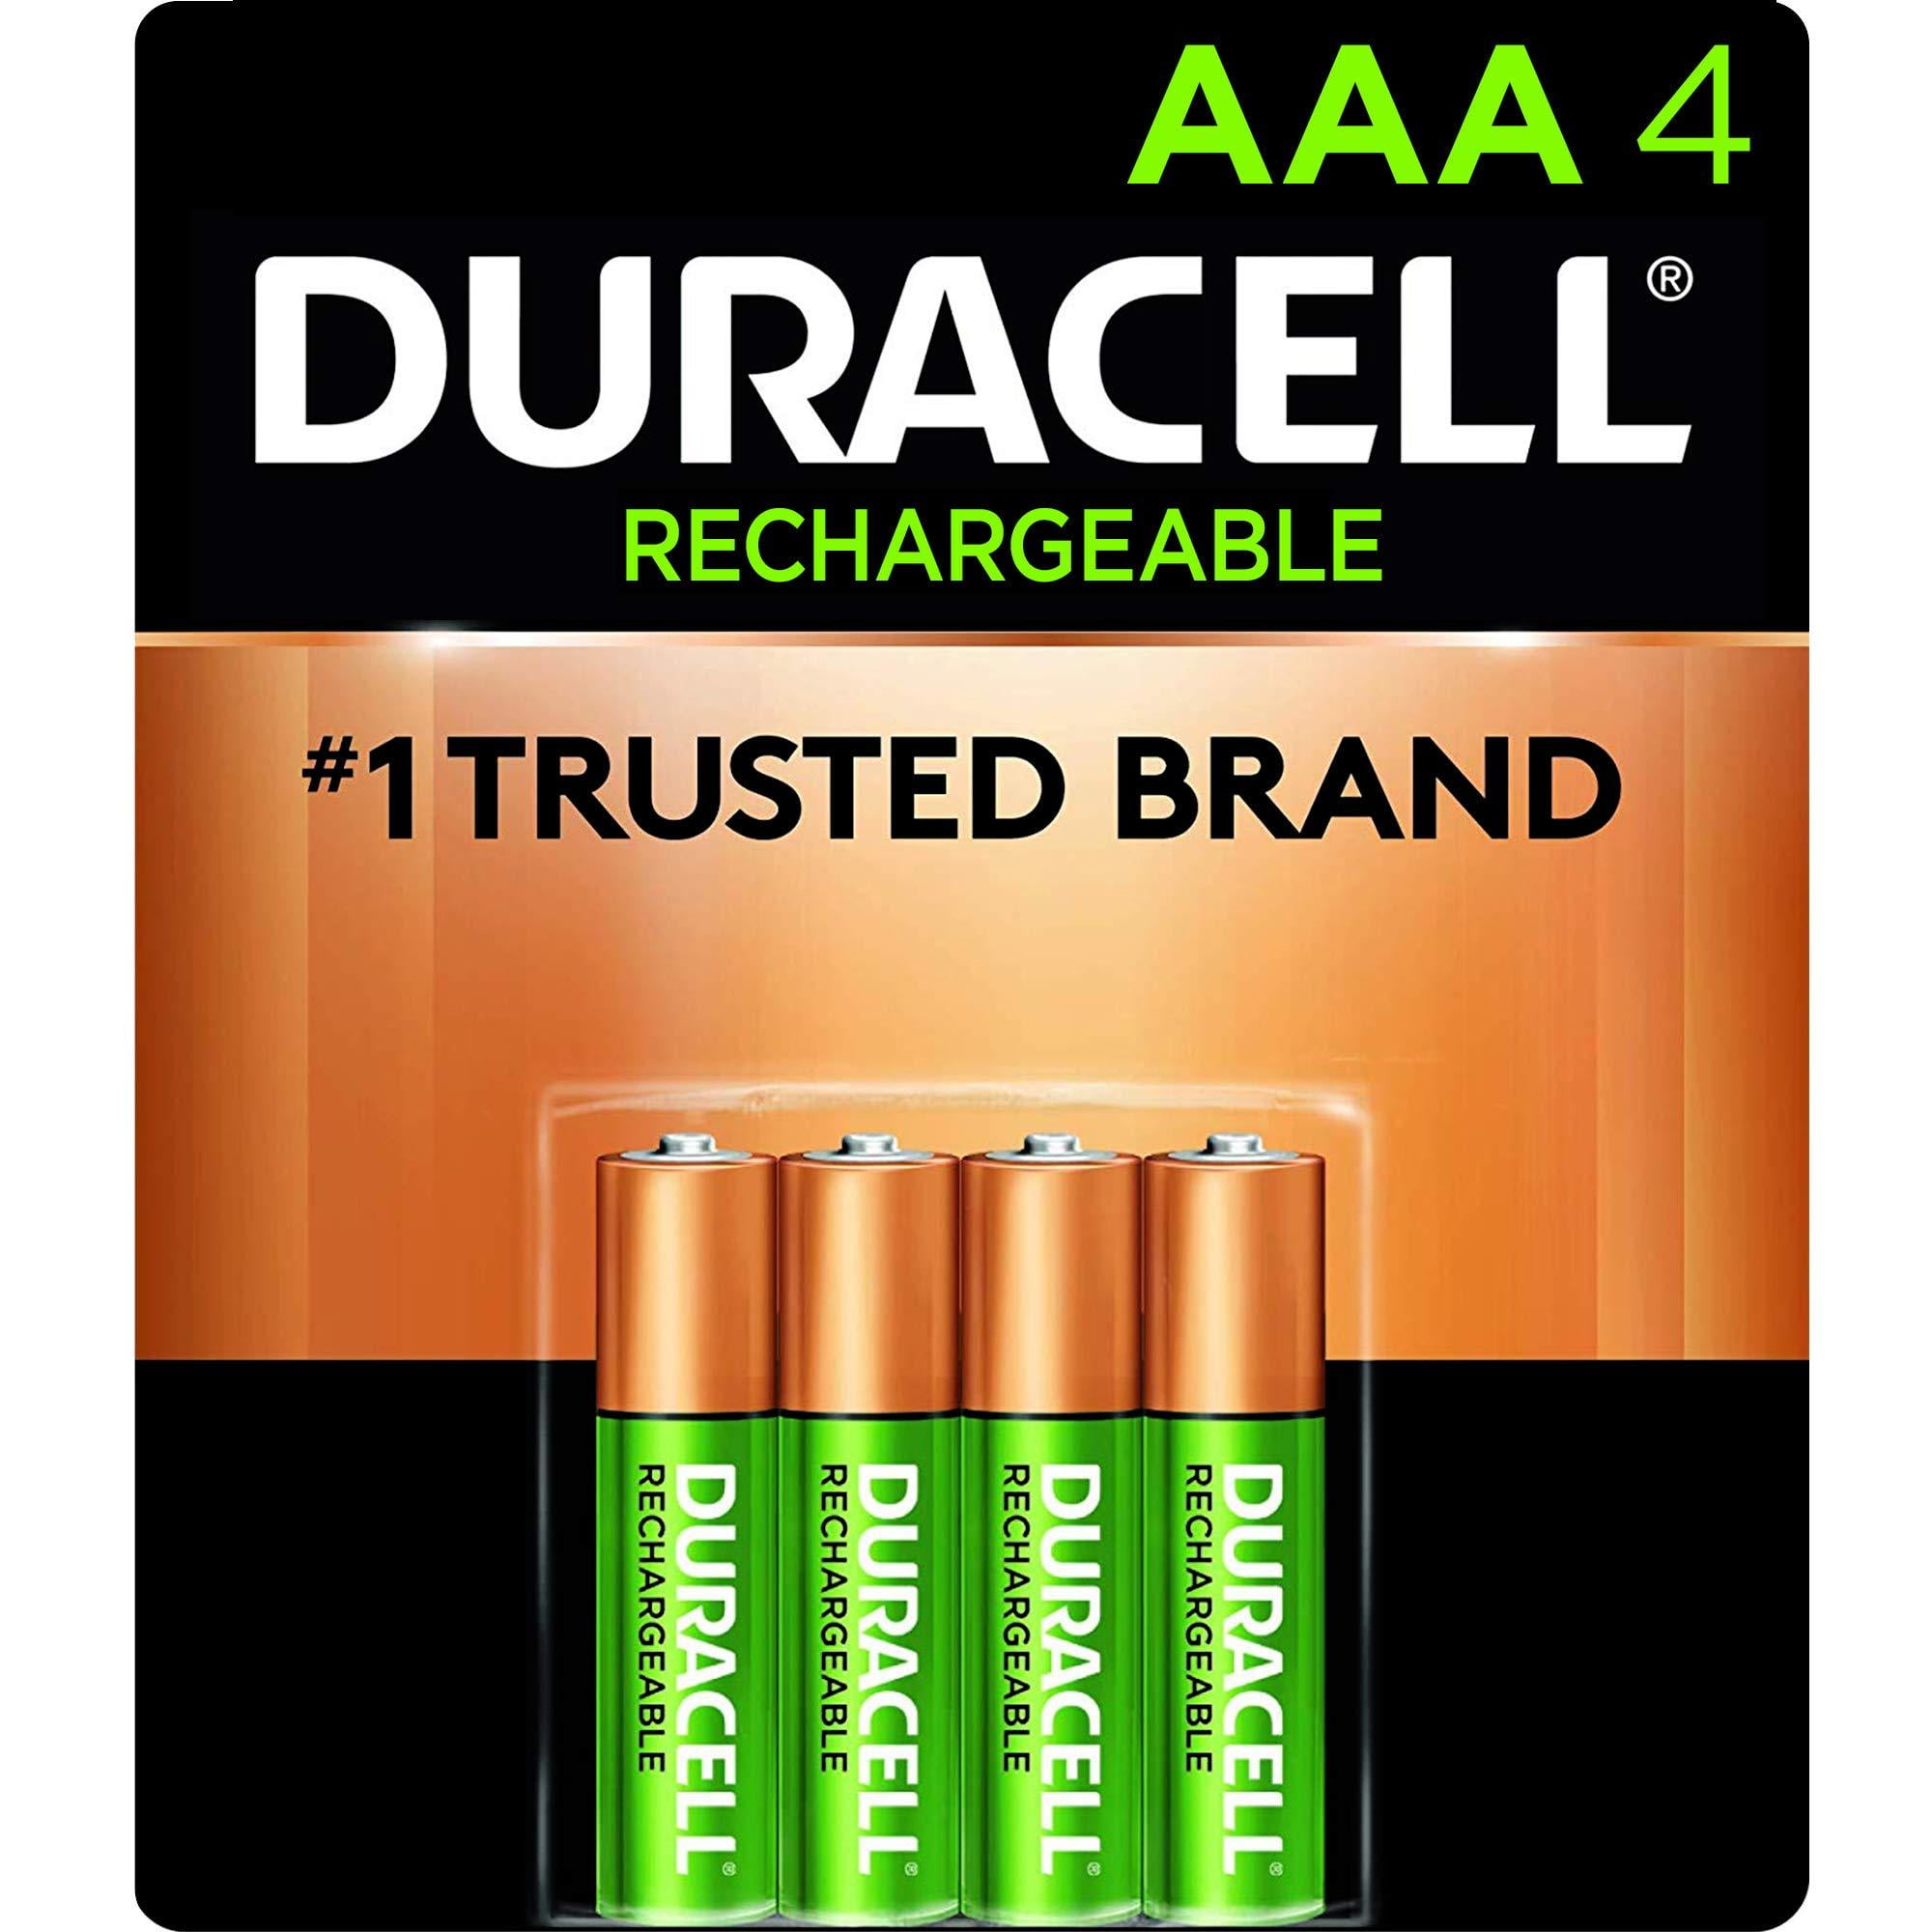 Duracell Basic AAA batteries - 4 pack